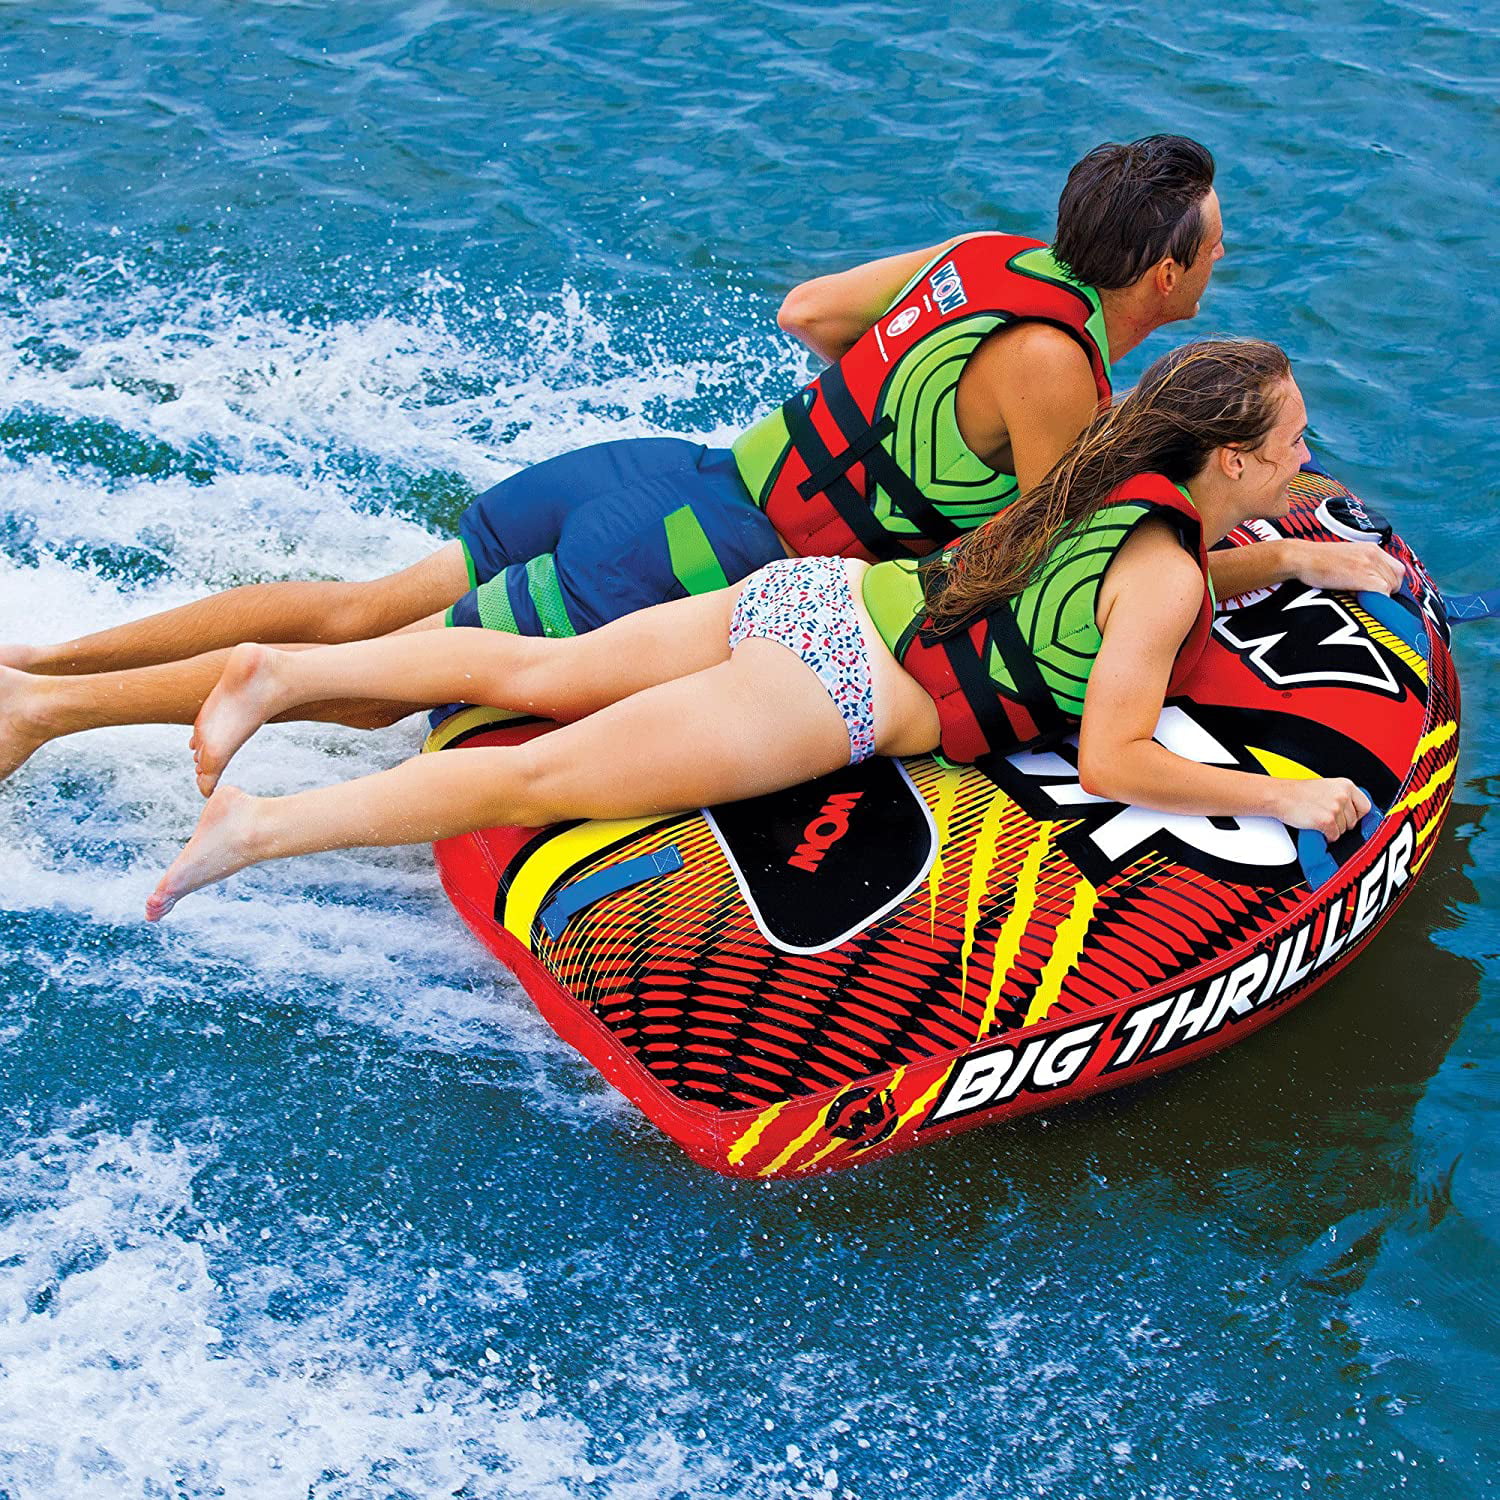 Details about   Watersports Thriller Deck Tube,Towable Tube Inflatable Boat Tube for Boating